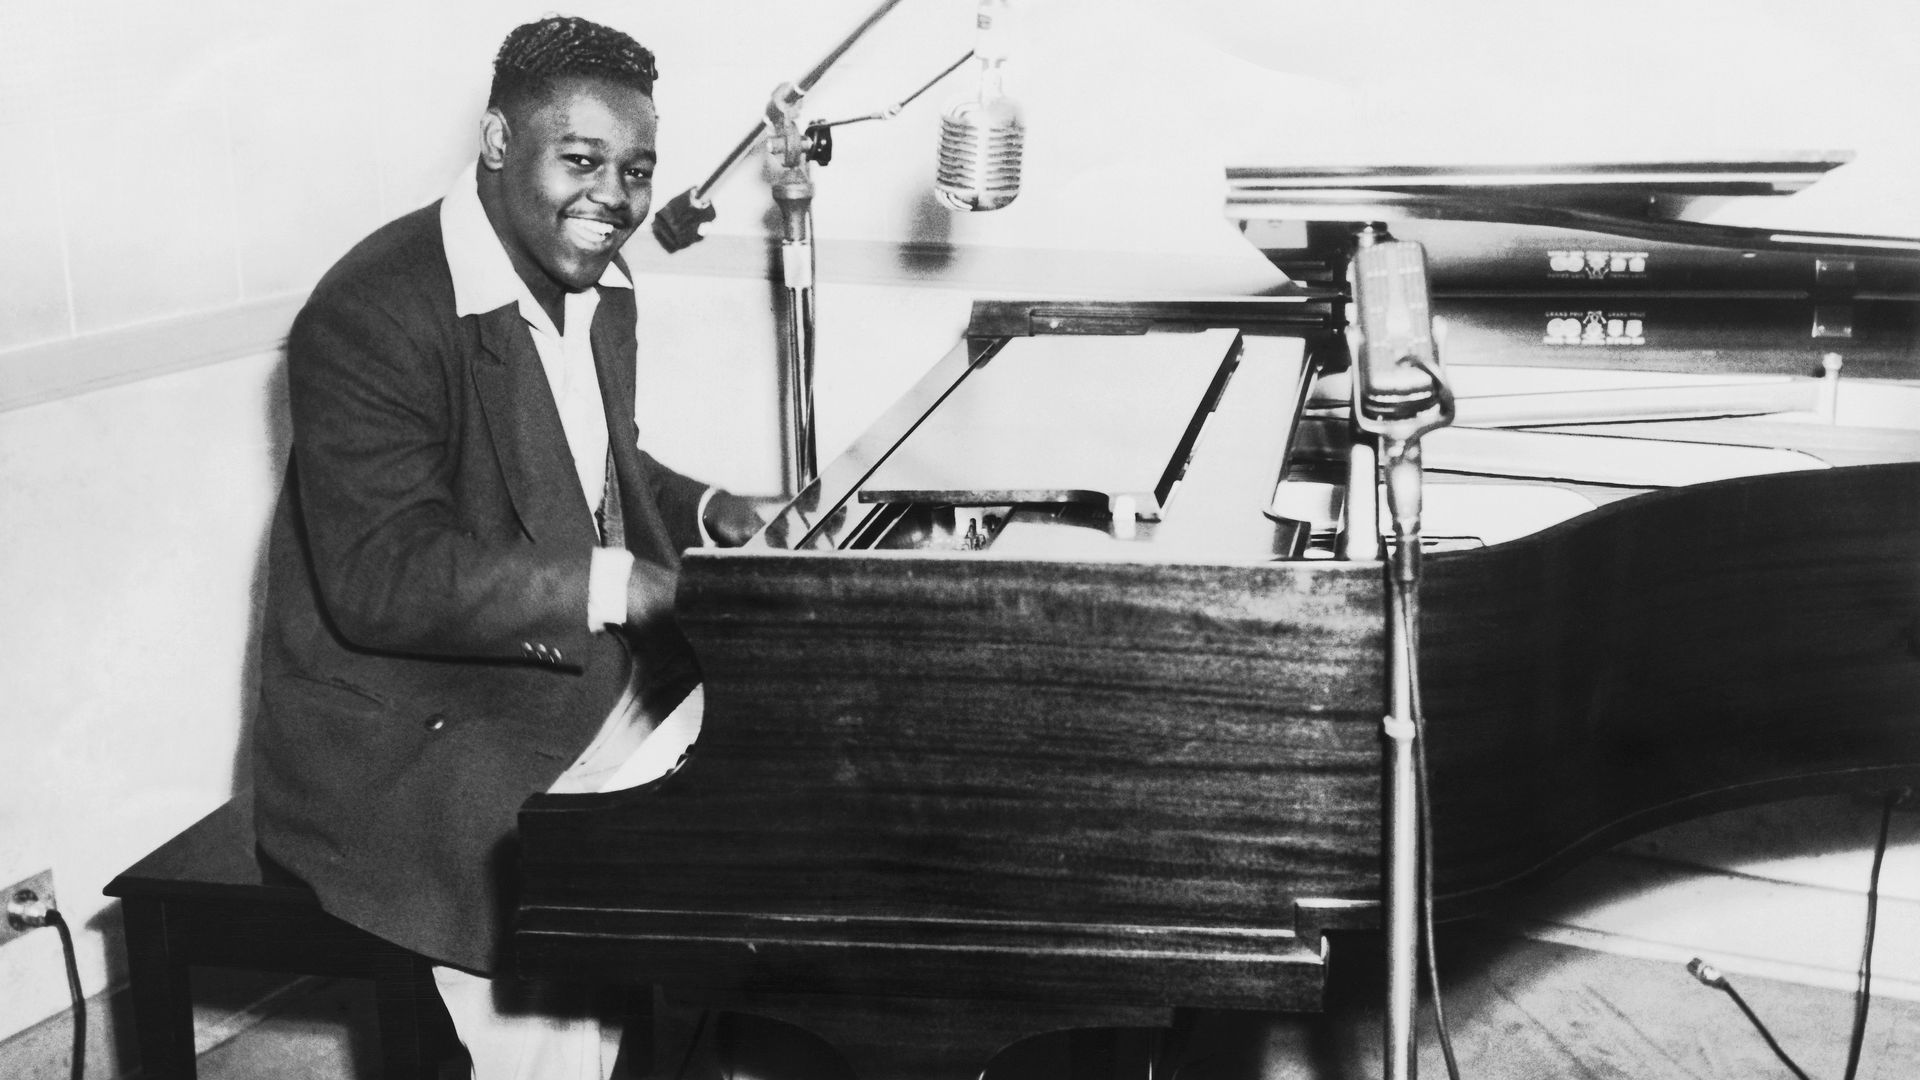 In a black and white photo, Fats Domino is seen playing piano in a recording studio while singing into a microphone.